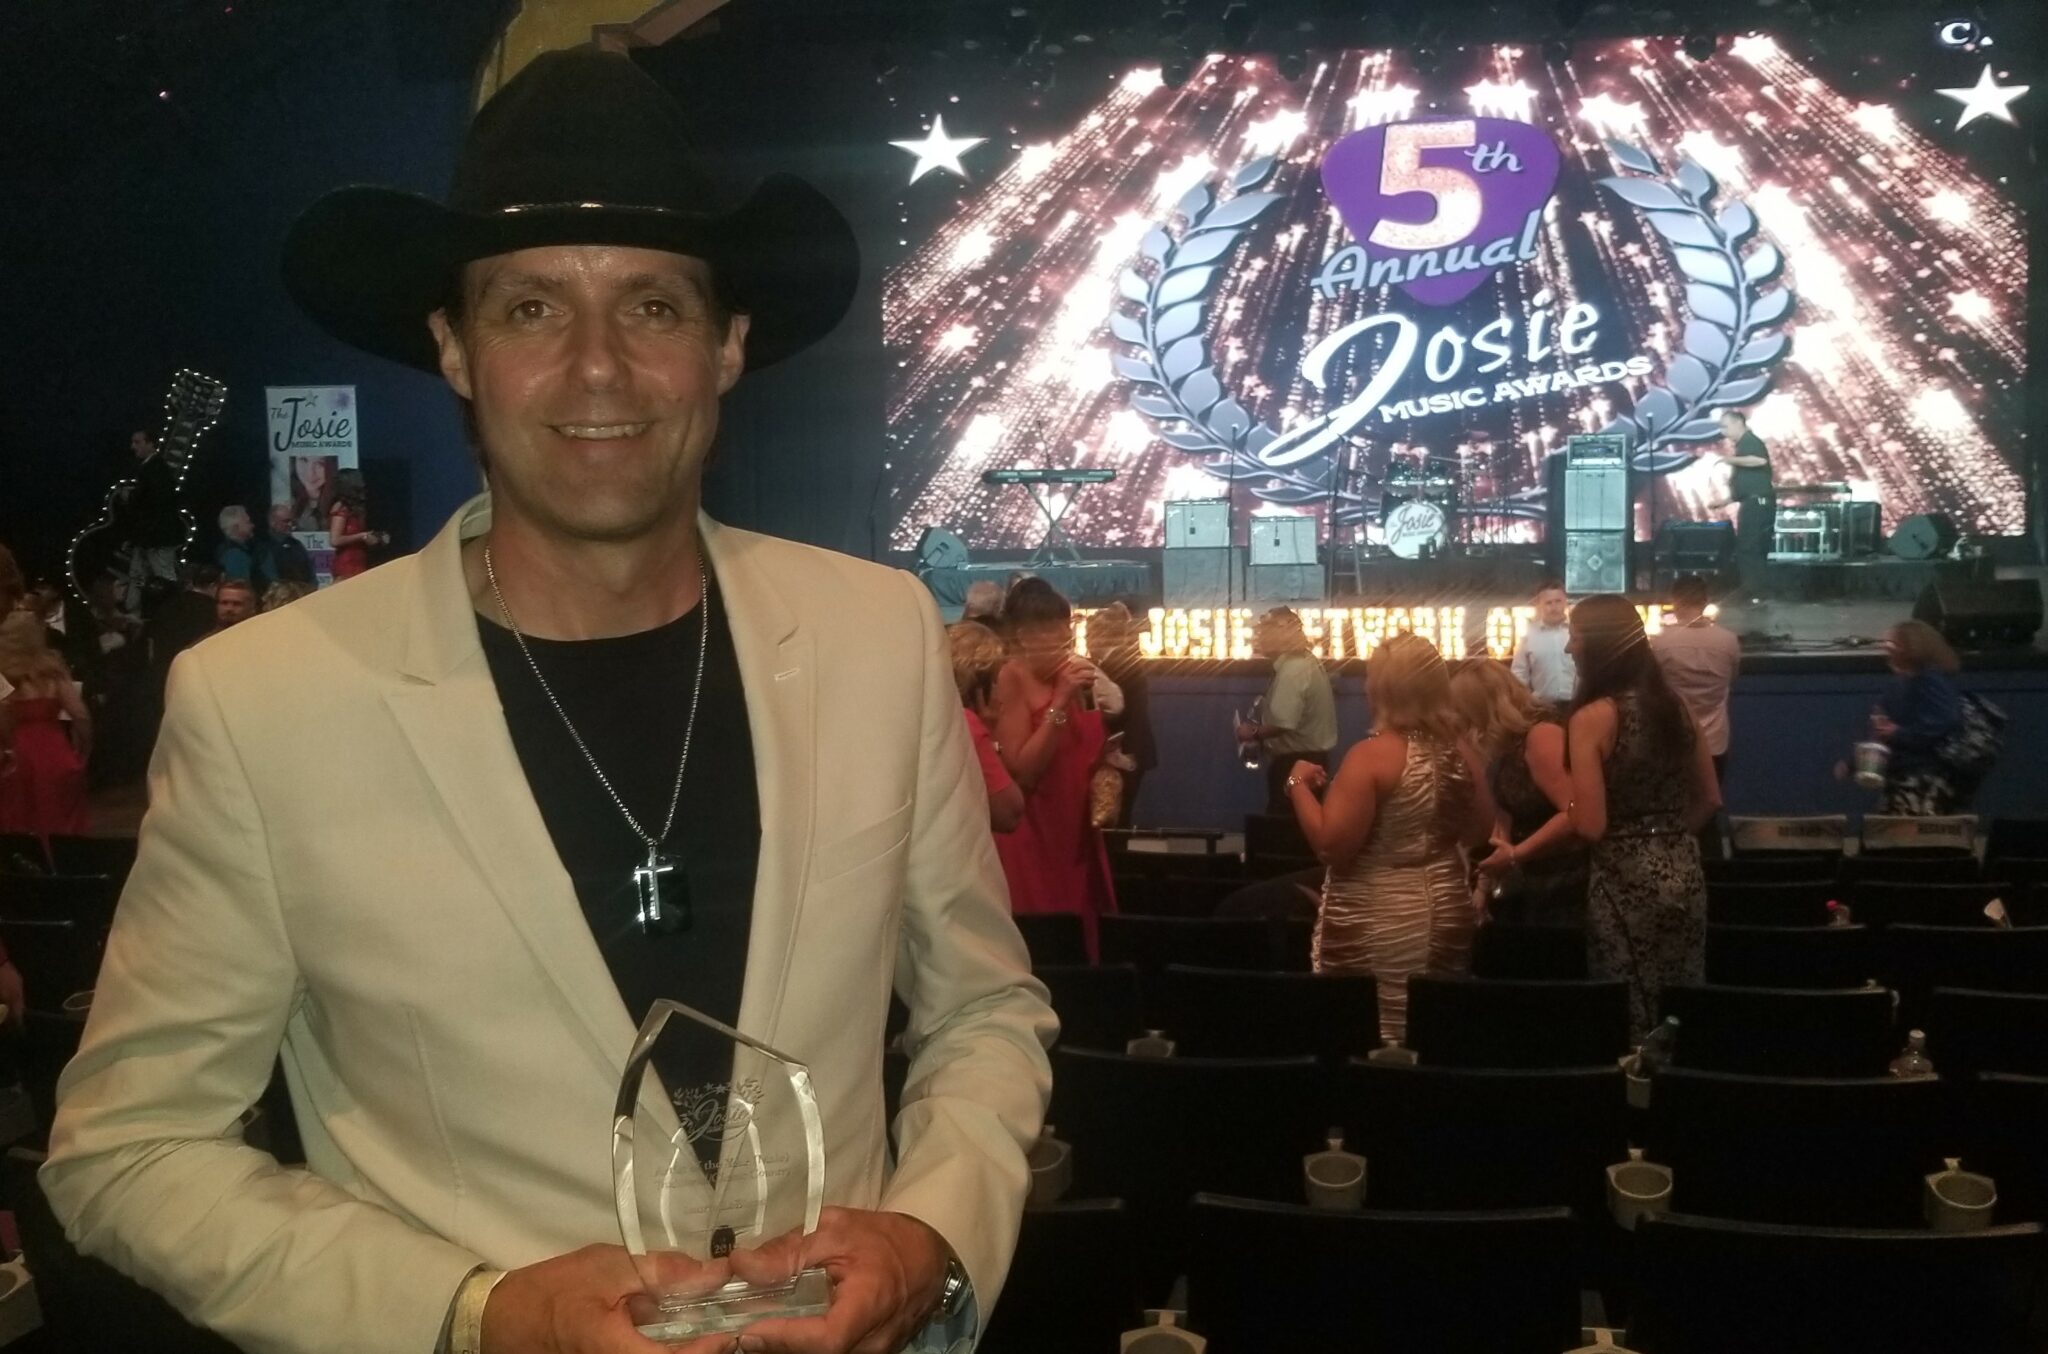 Laurie LeBlanc "Male Country Artist of the Year" au Josie Music Awards